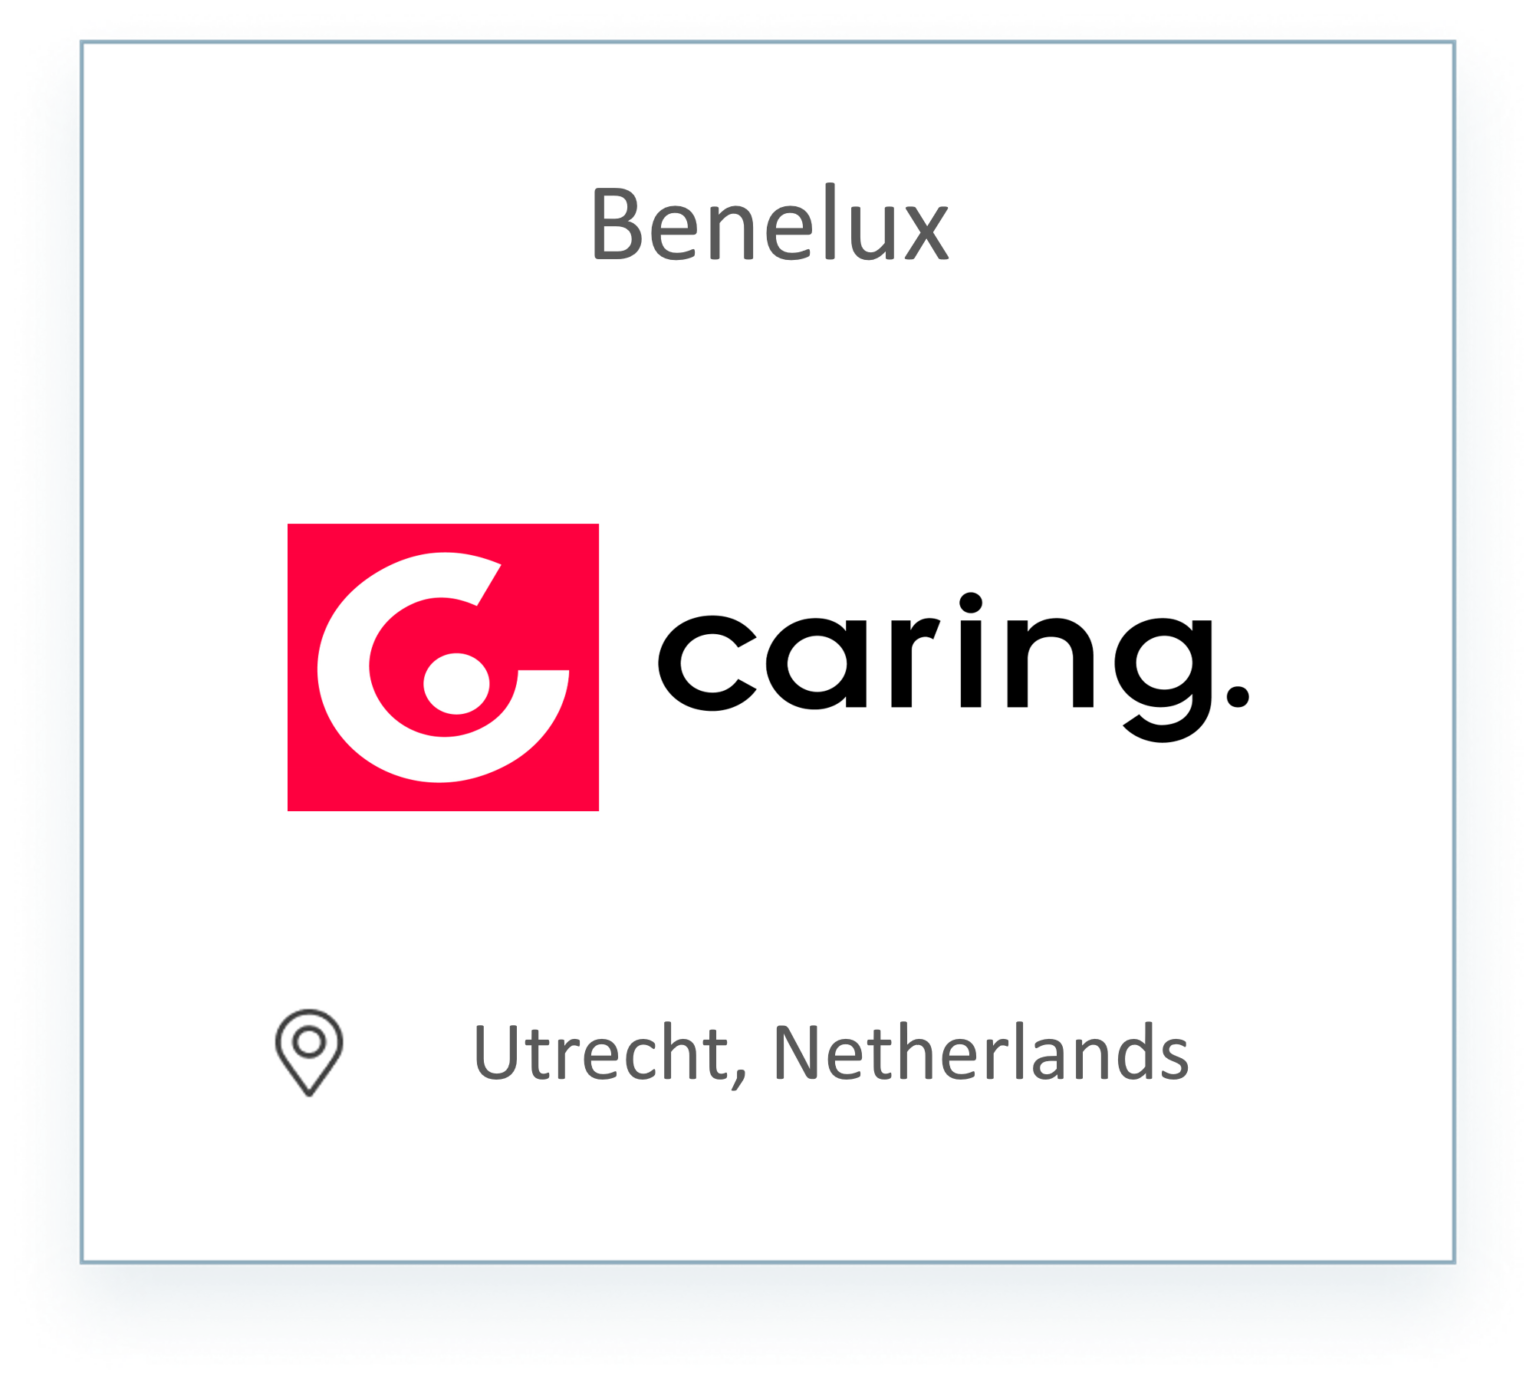 Caring Fieldmarketing agency, covers the Benelux area in Europe.